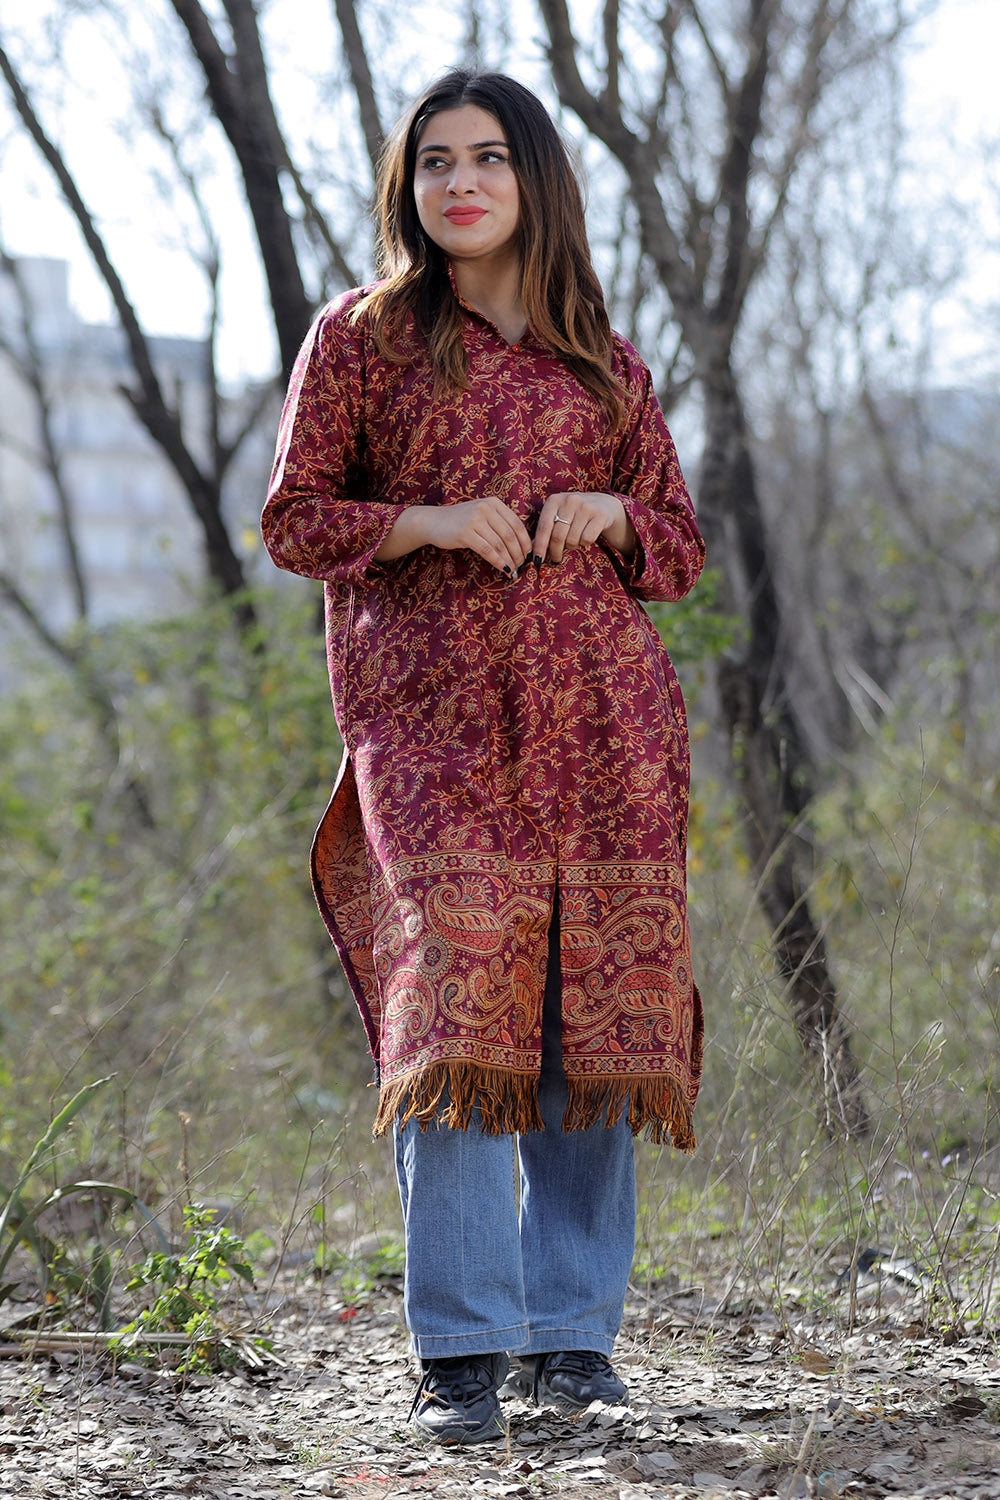 What winter wear looks good with kurtis? - Quora